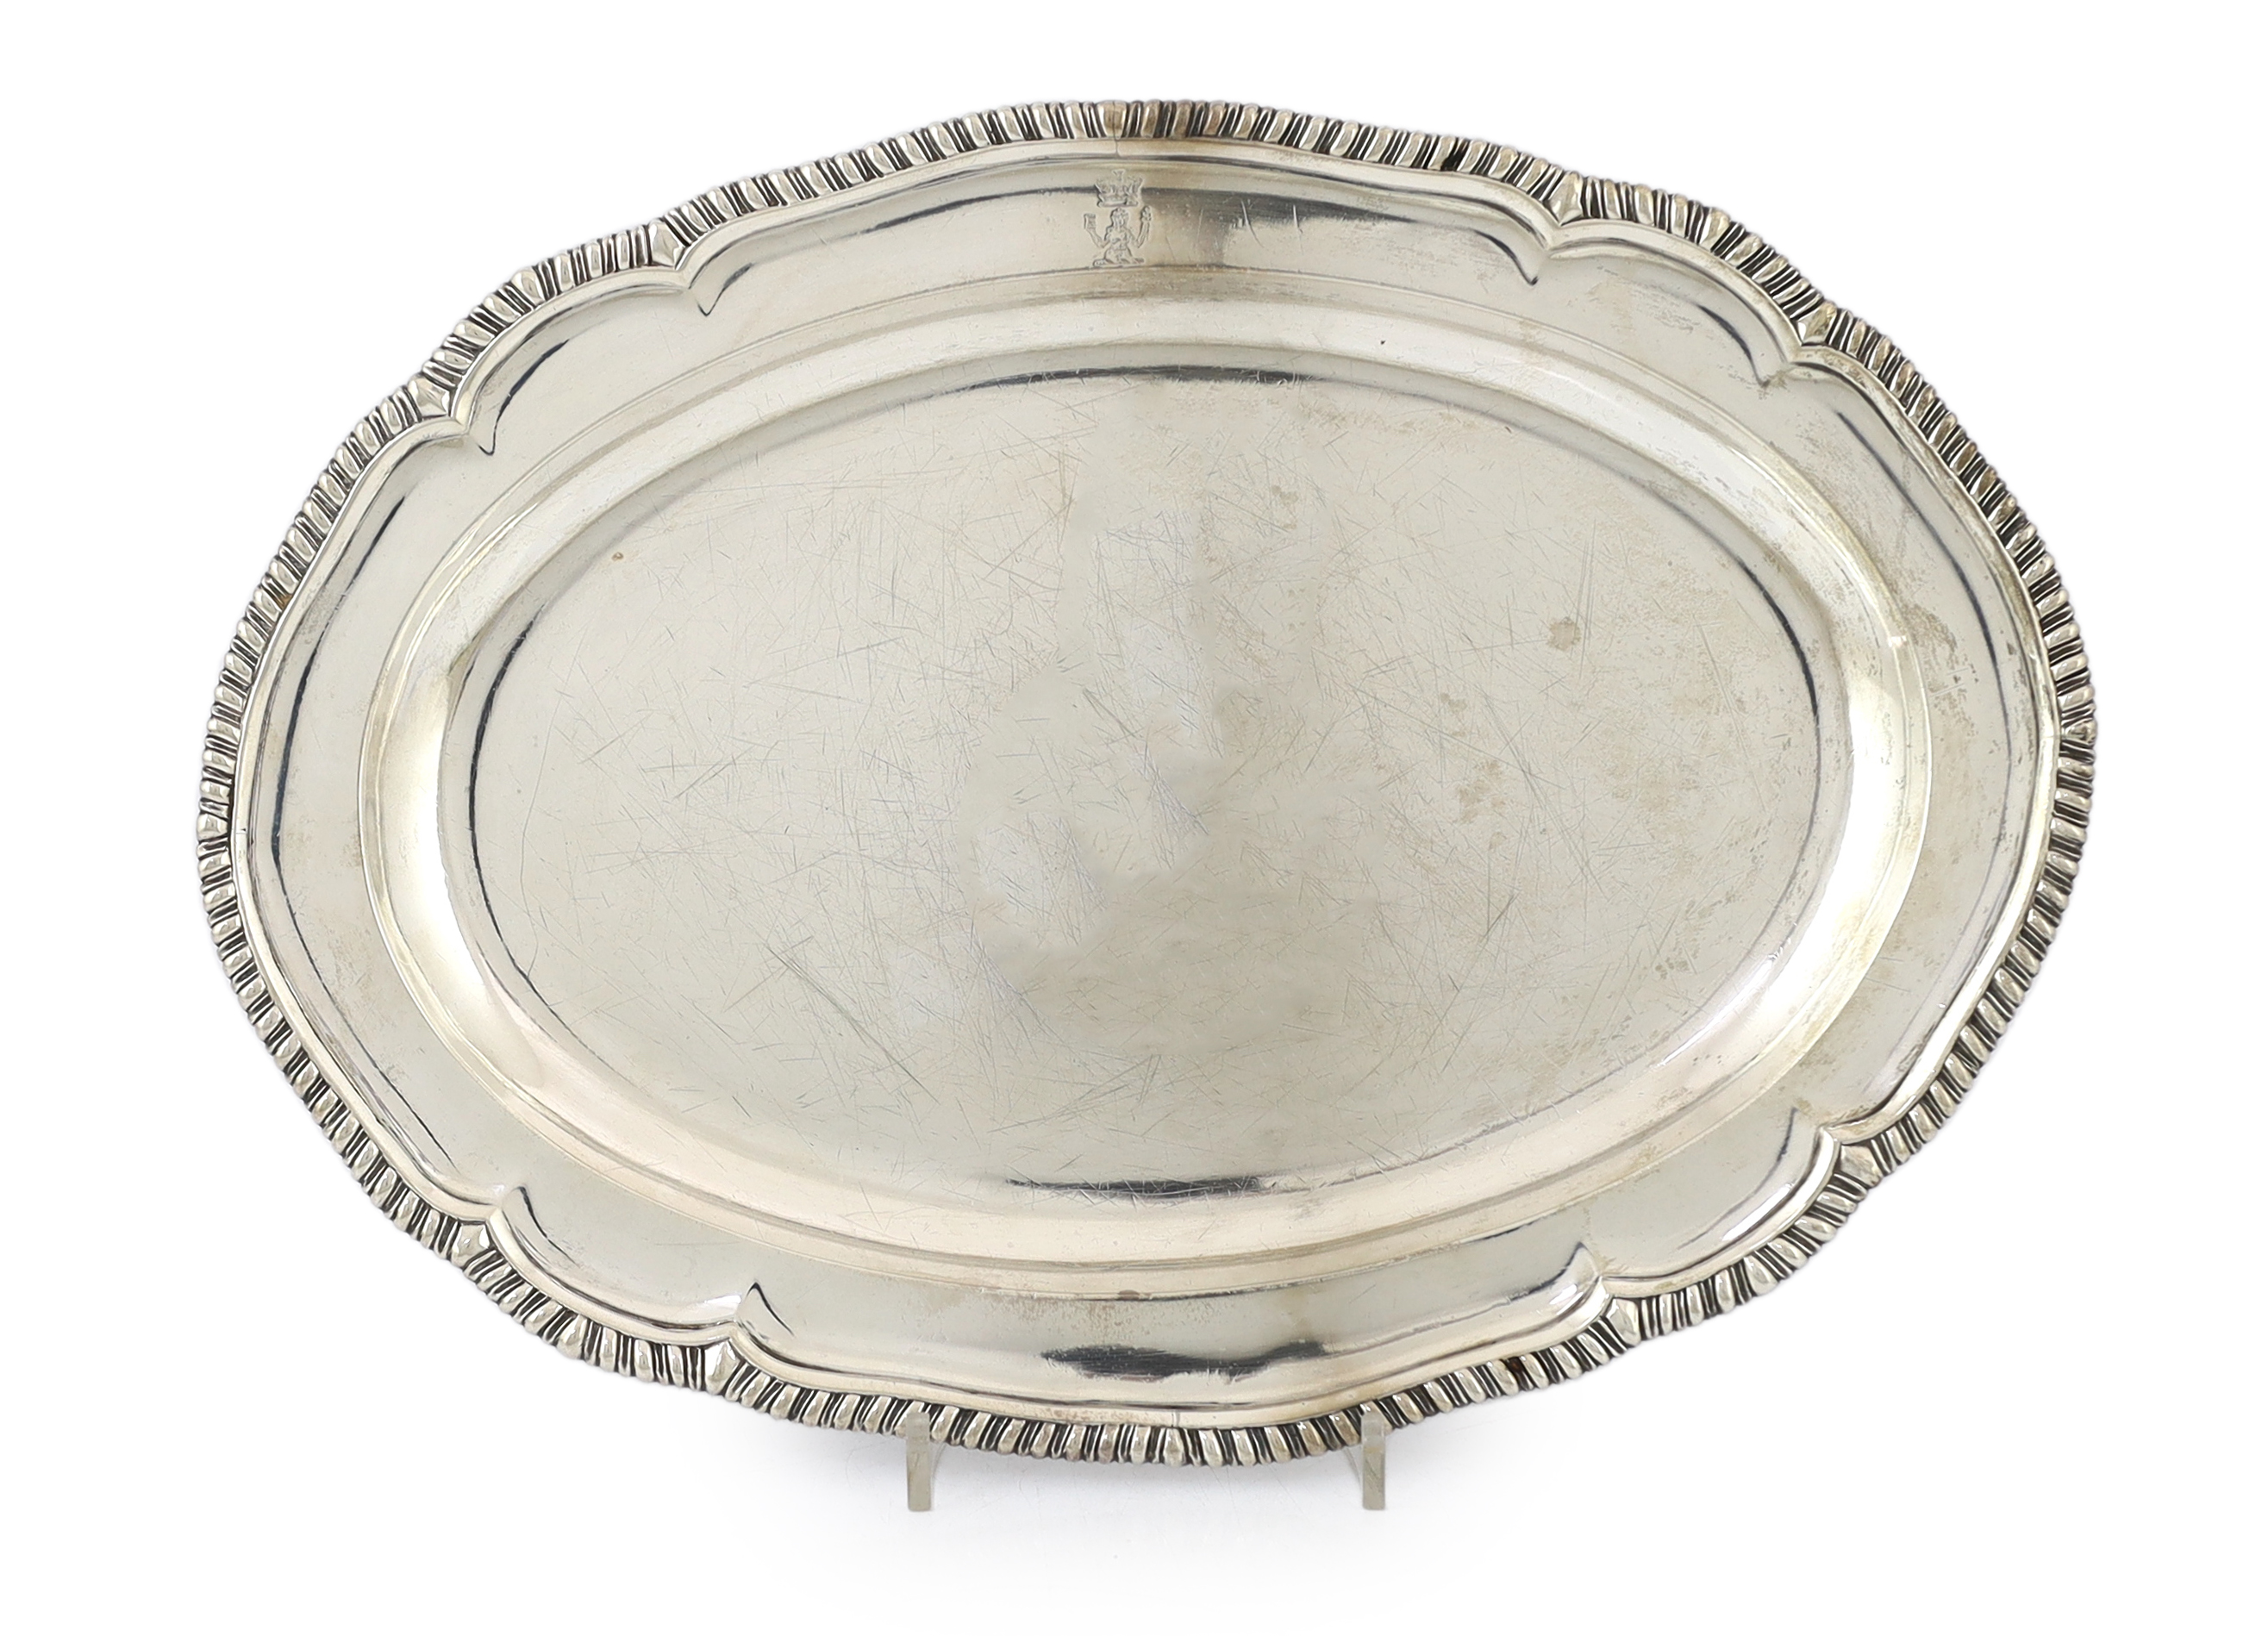 A George III silver oval meat dish, by William Fountain